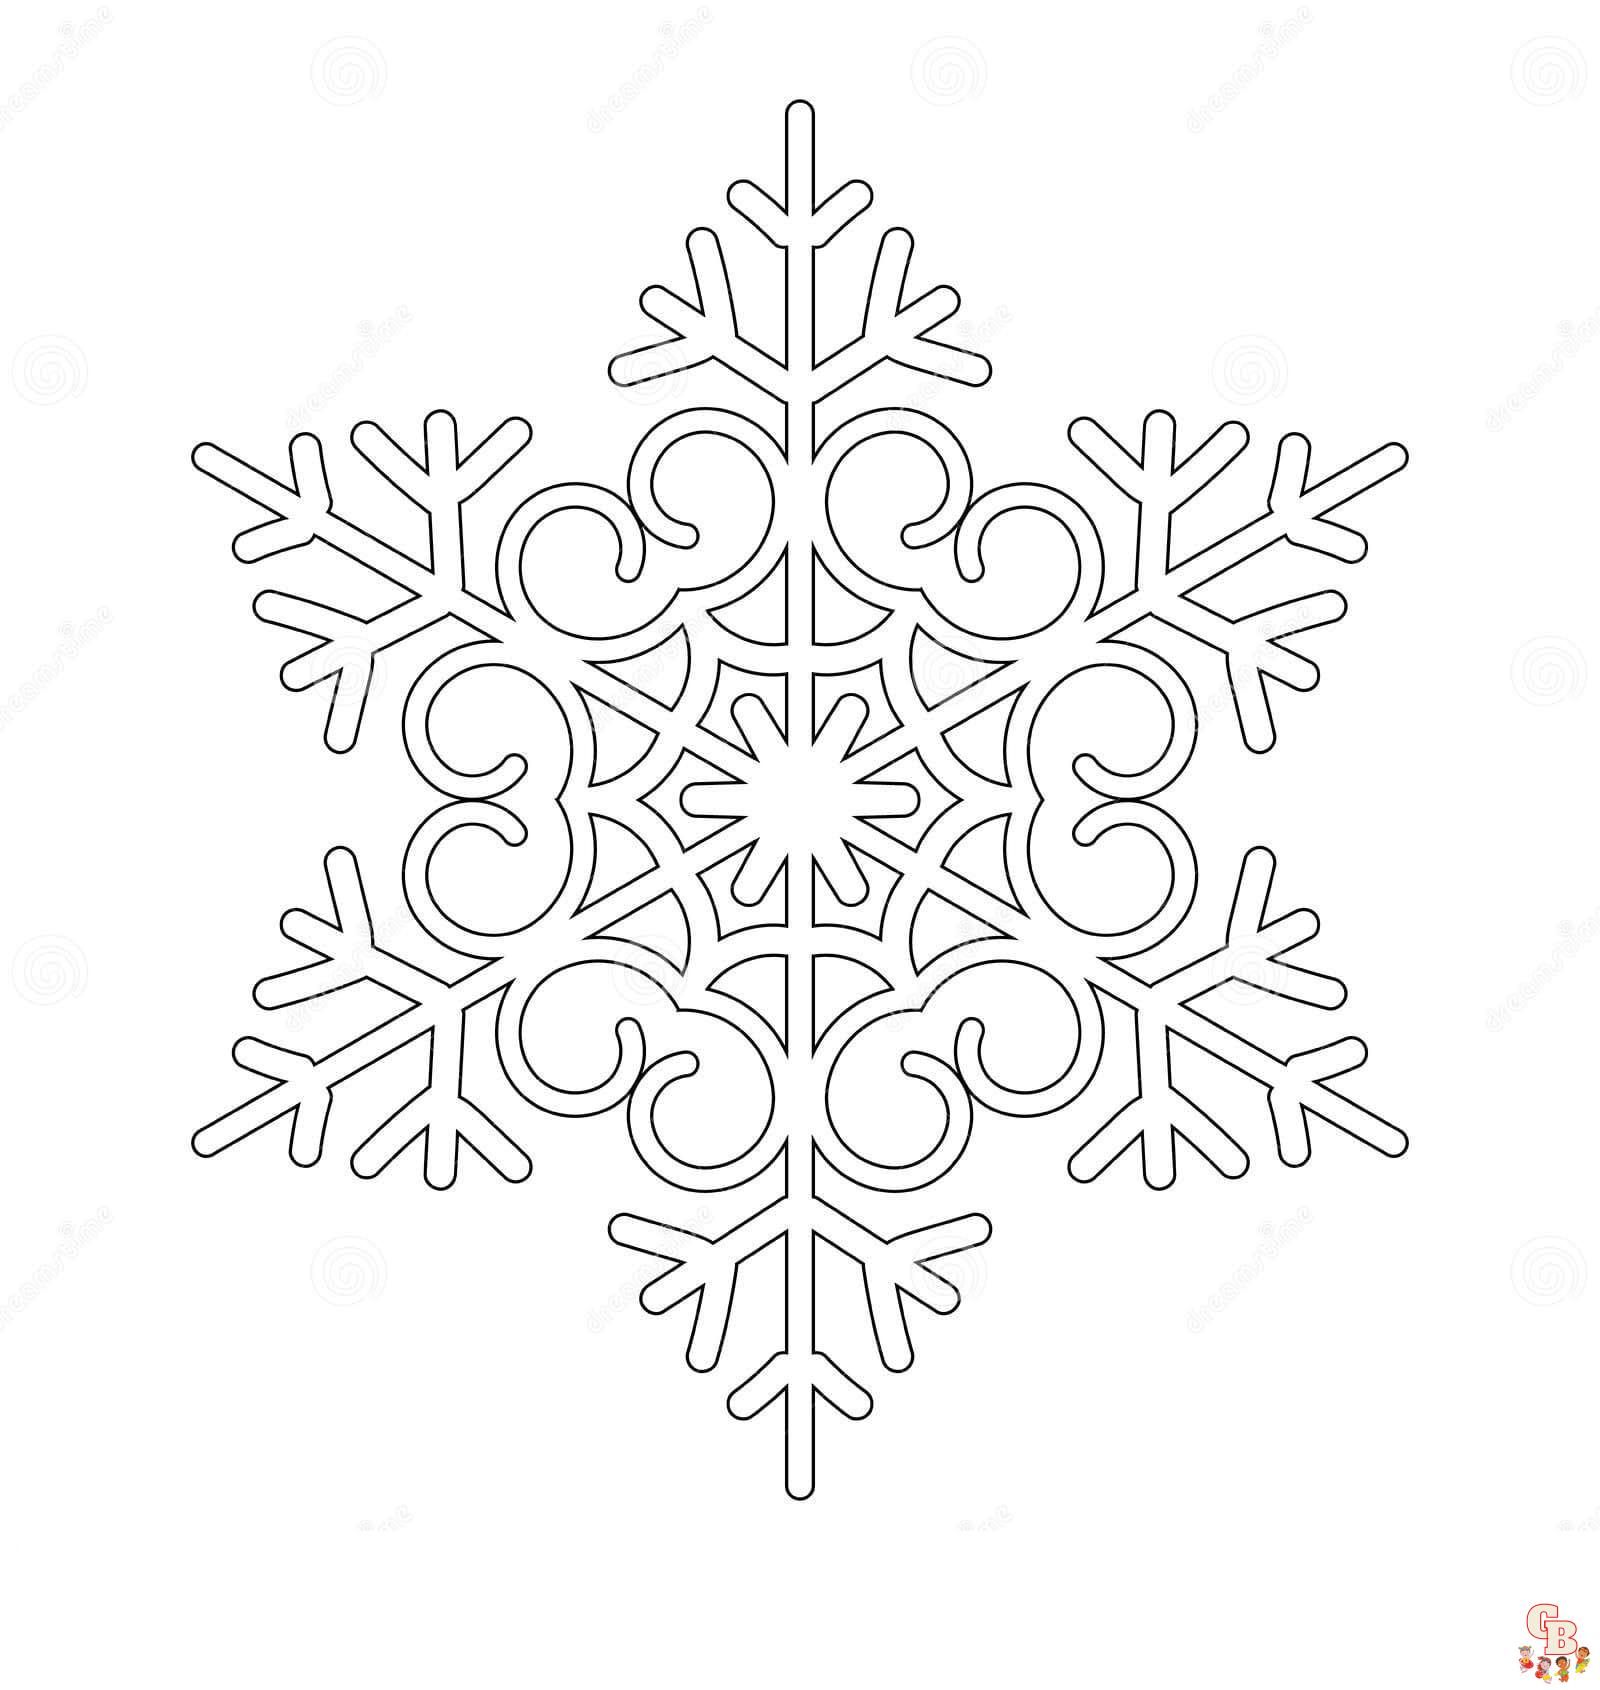 Snowflake coloring pages free